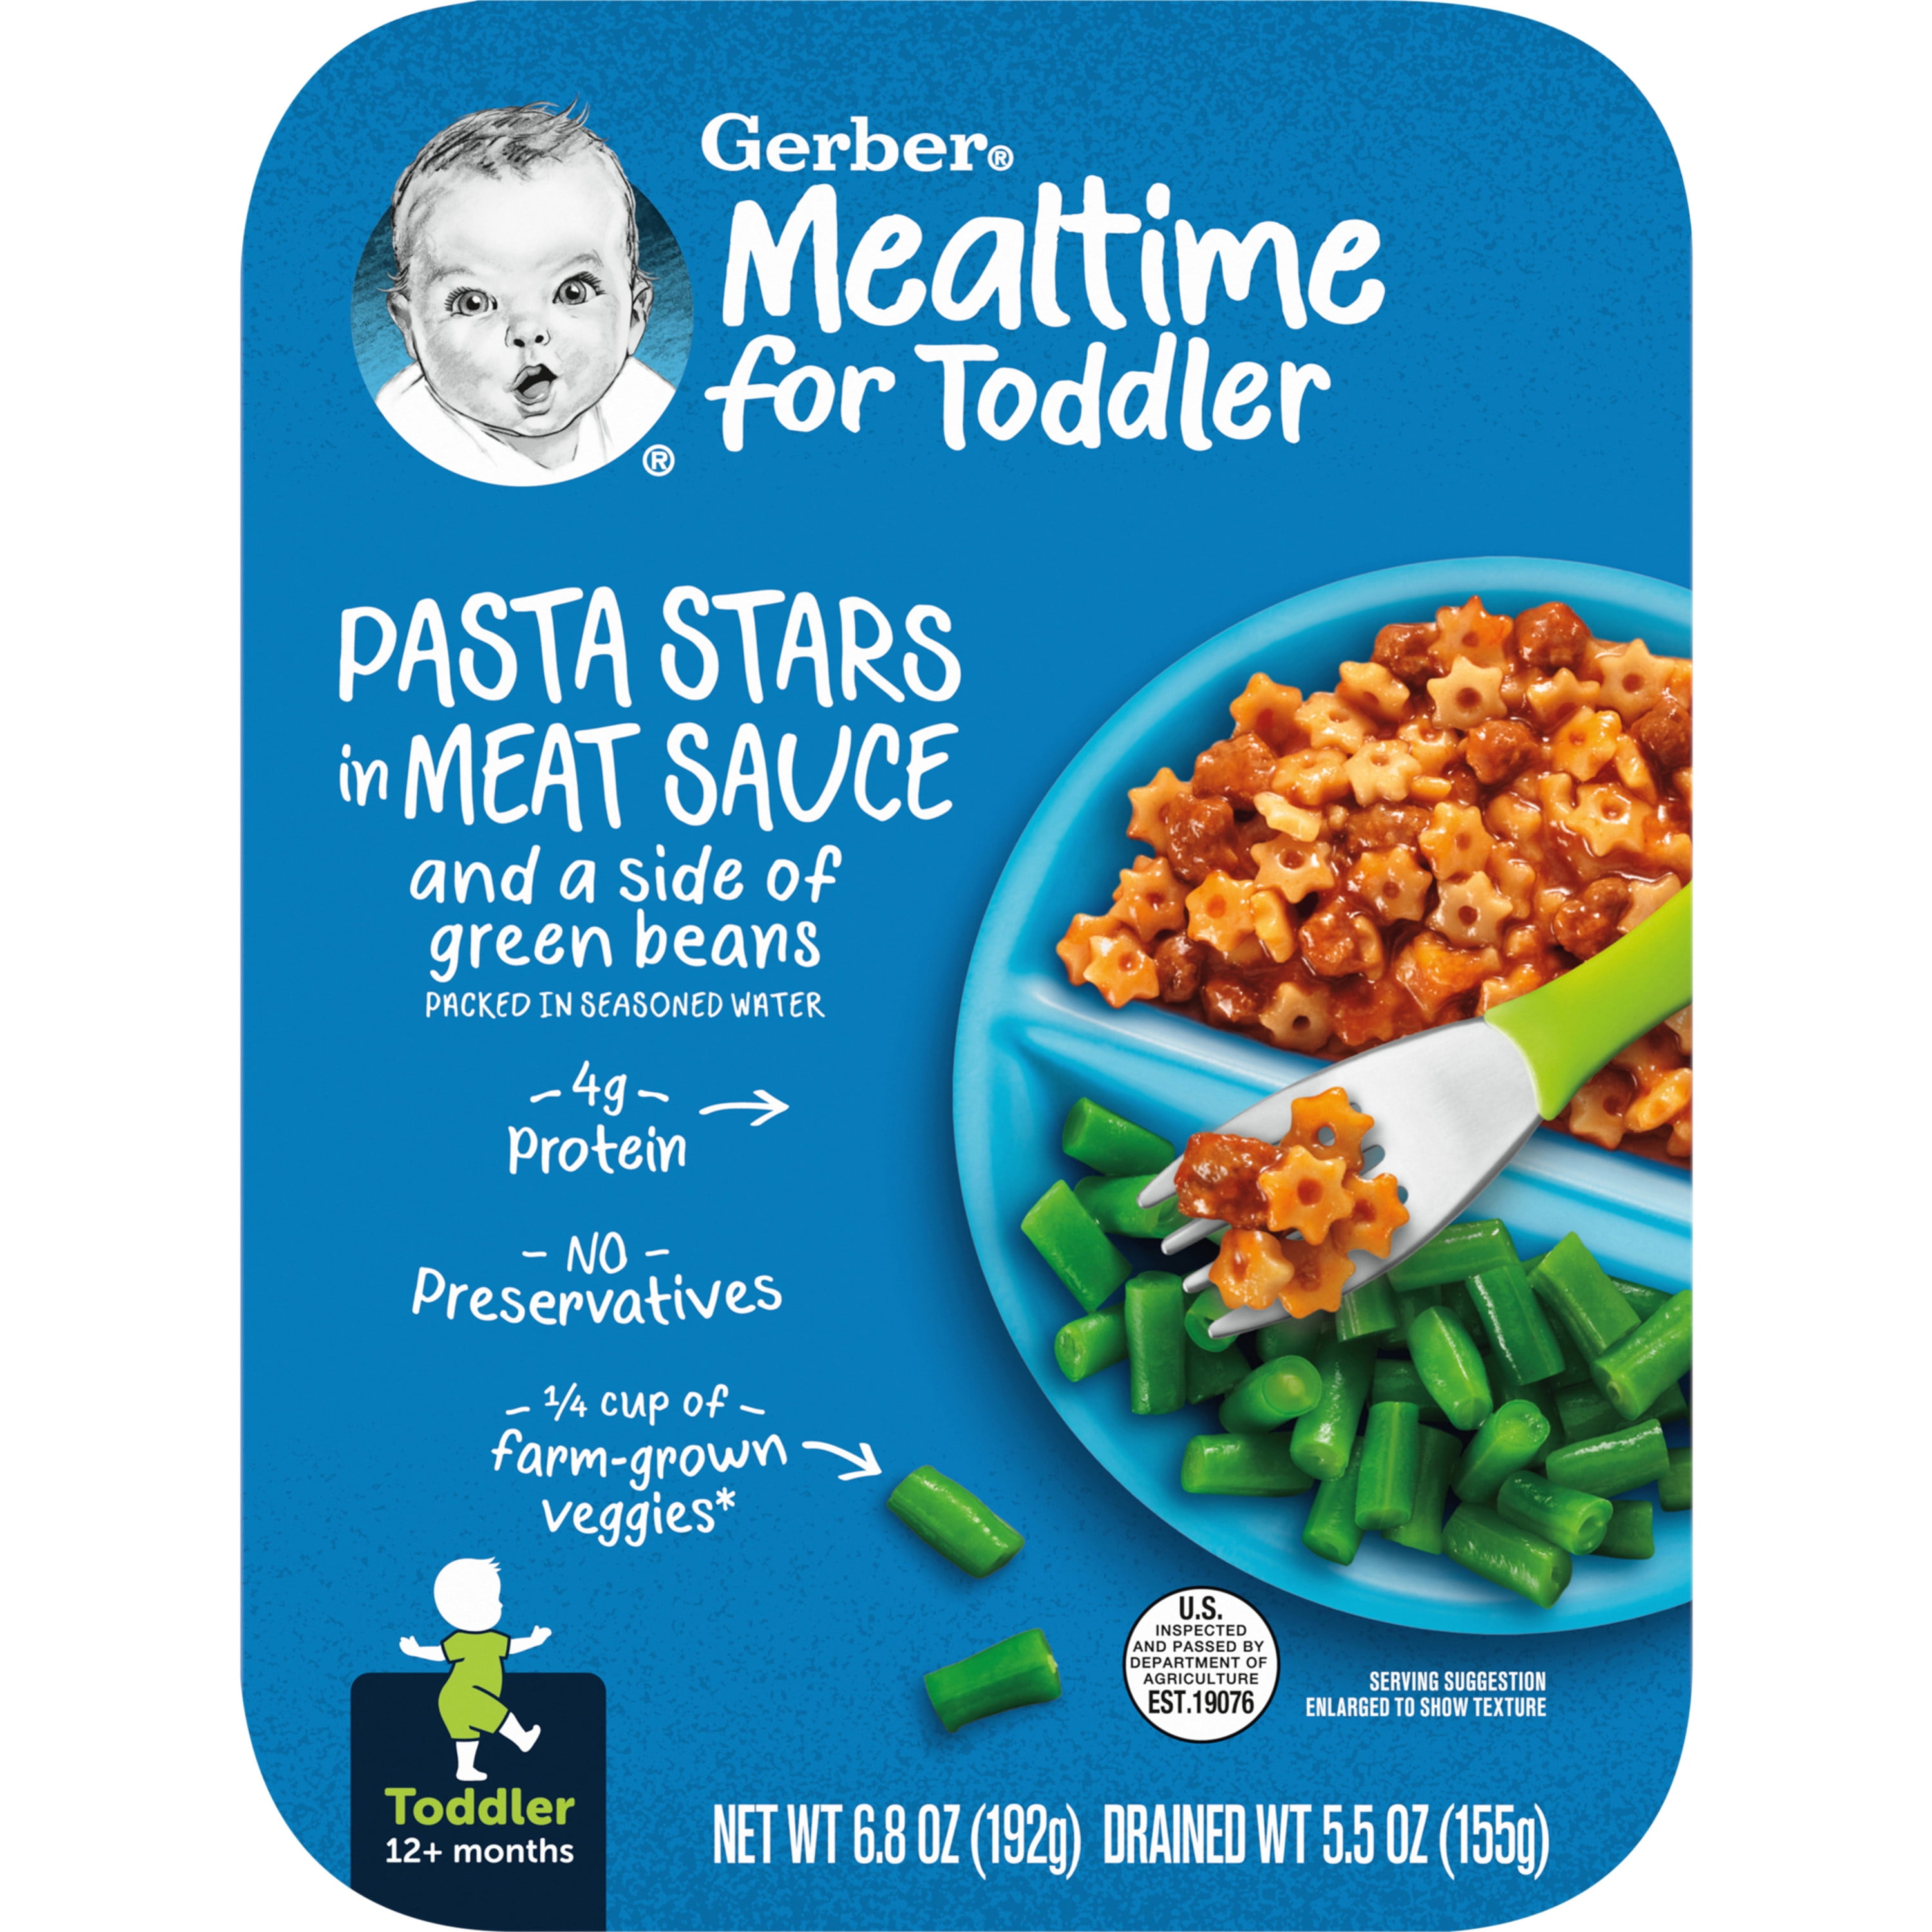 Gerber Mealtime for Toddler, Pasta Stars in Meat Sauce with Green Beans Toddler Food, 6.8 oz Tray